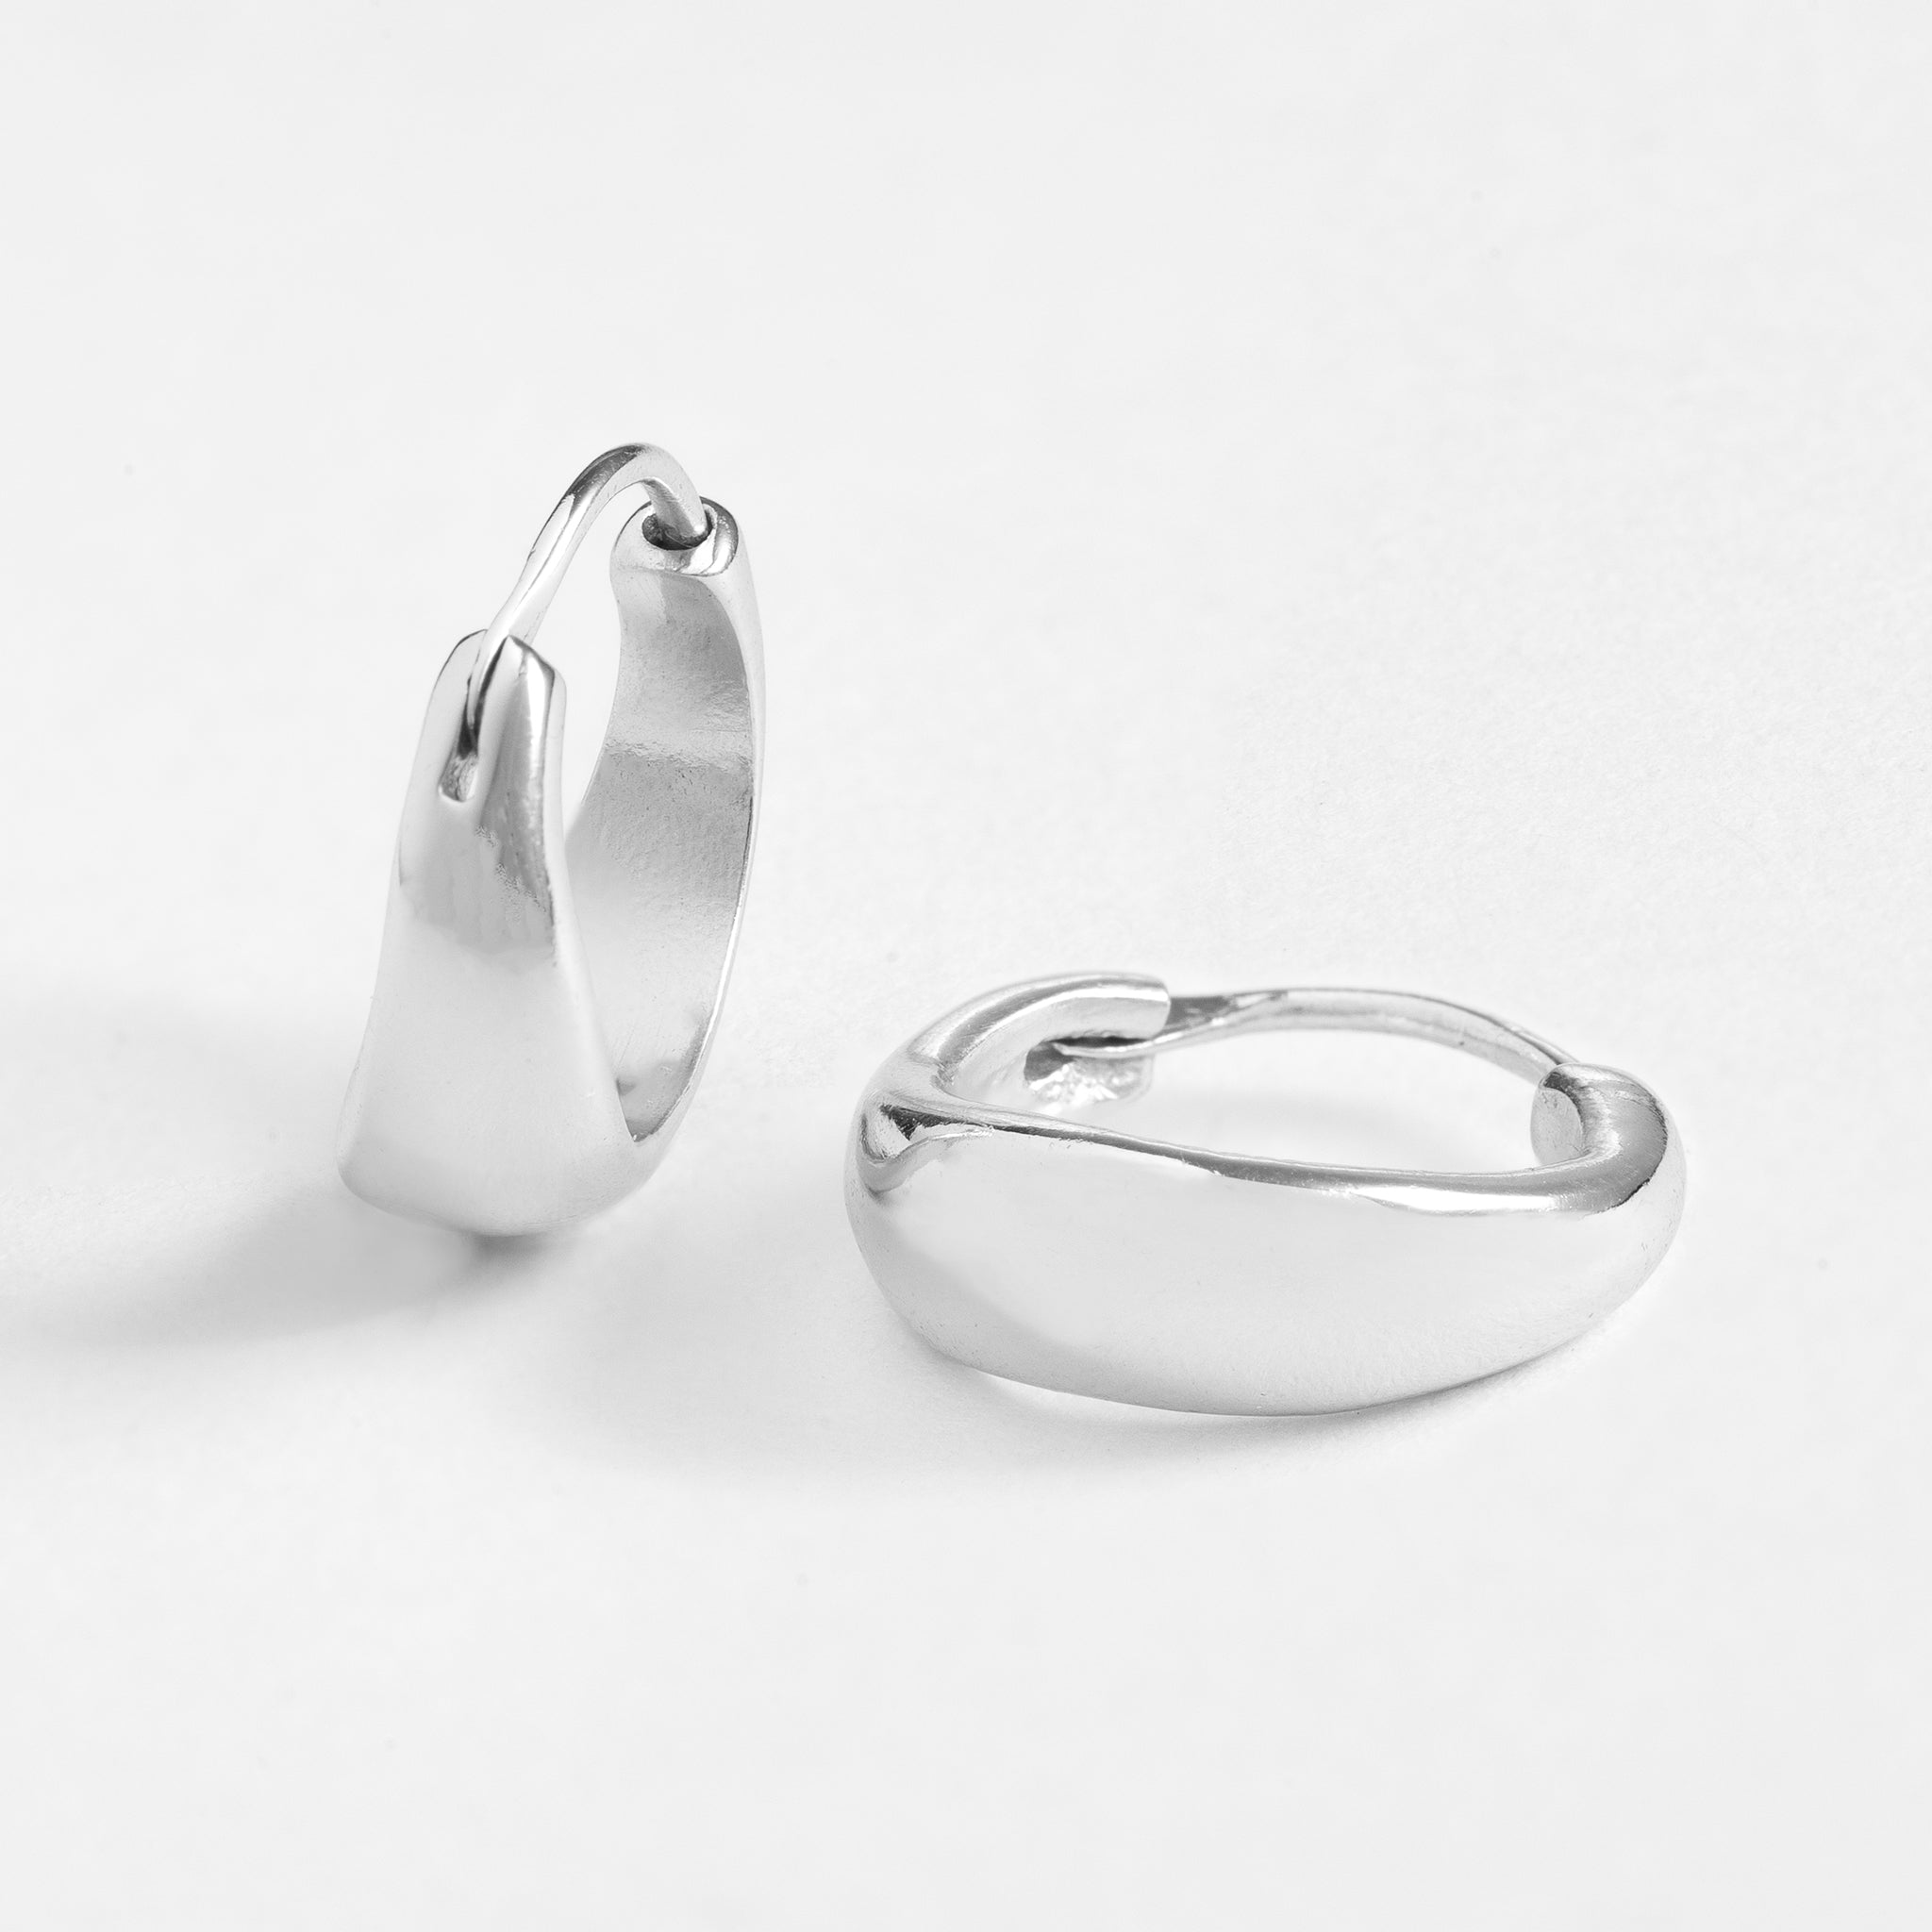 Huggie features a handcut natural round shape and is crafted from sterling silver or 18ct gold vermeil.